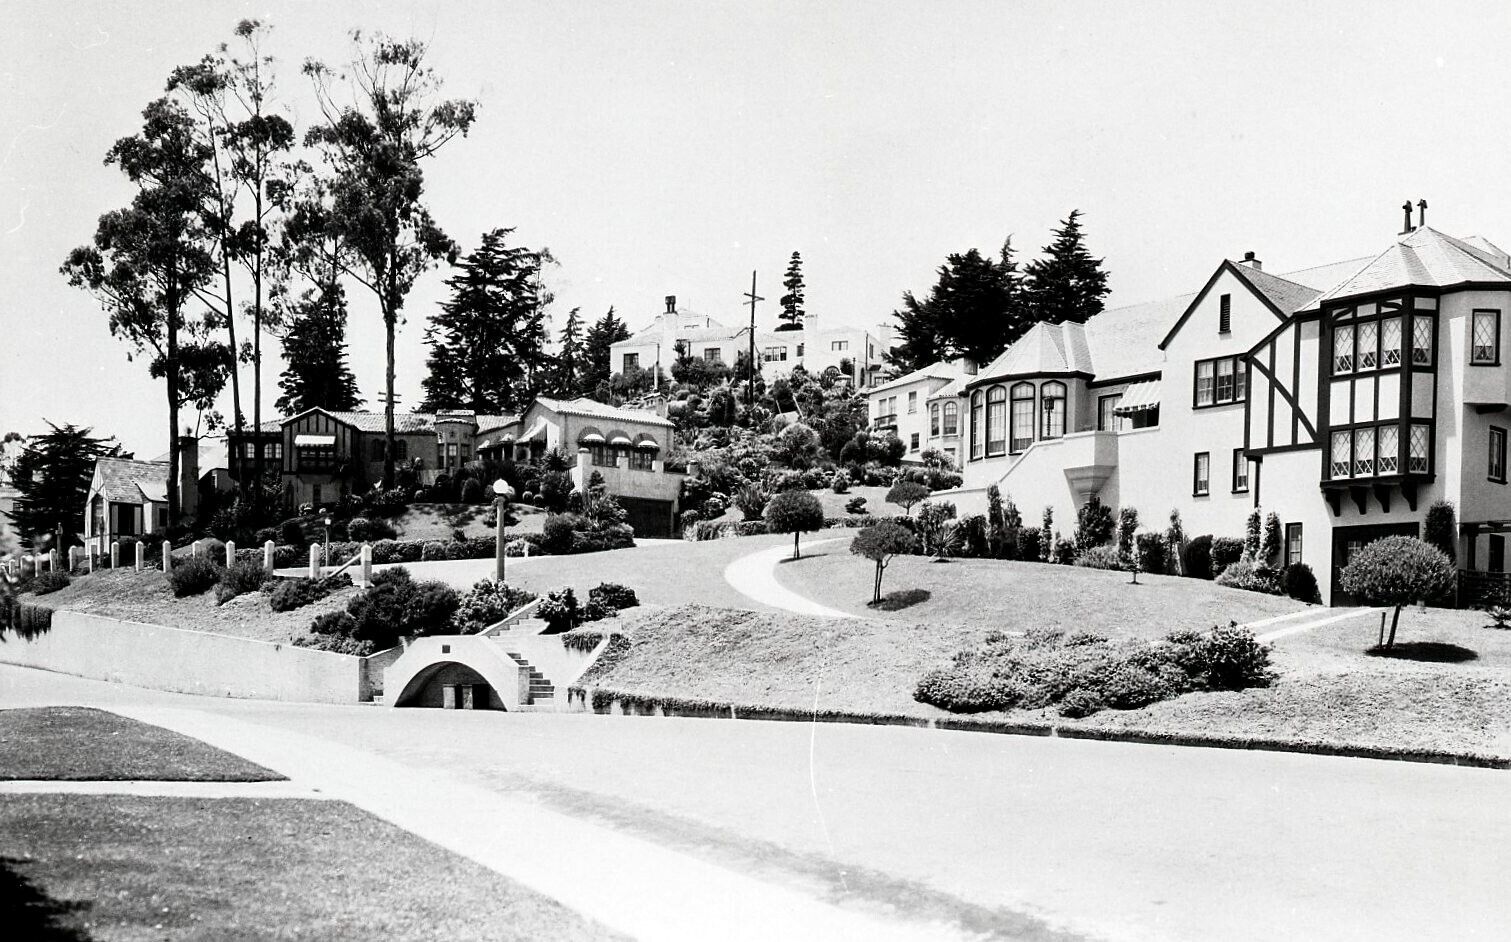 1920s SAN FRANCISCO UNKNOWN LOCATION with BEAUTIFUL HOMES on HILLSIDE~NEGATIVE